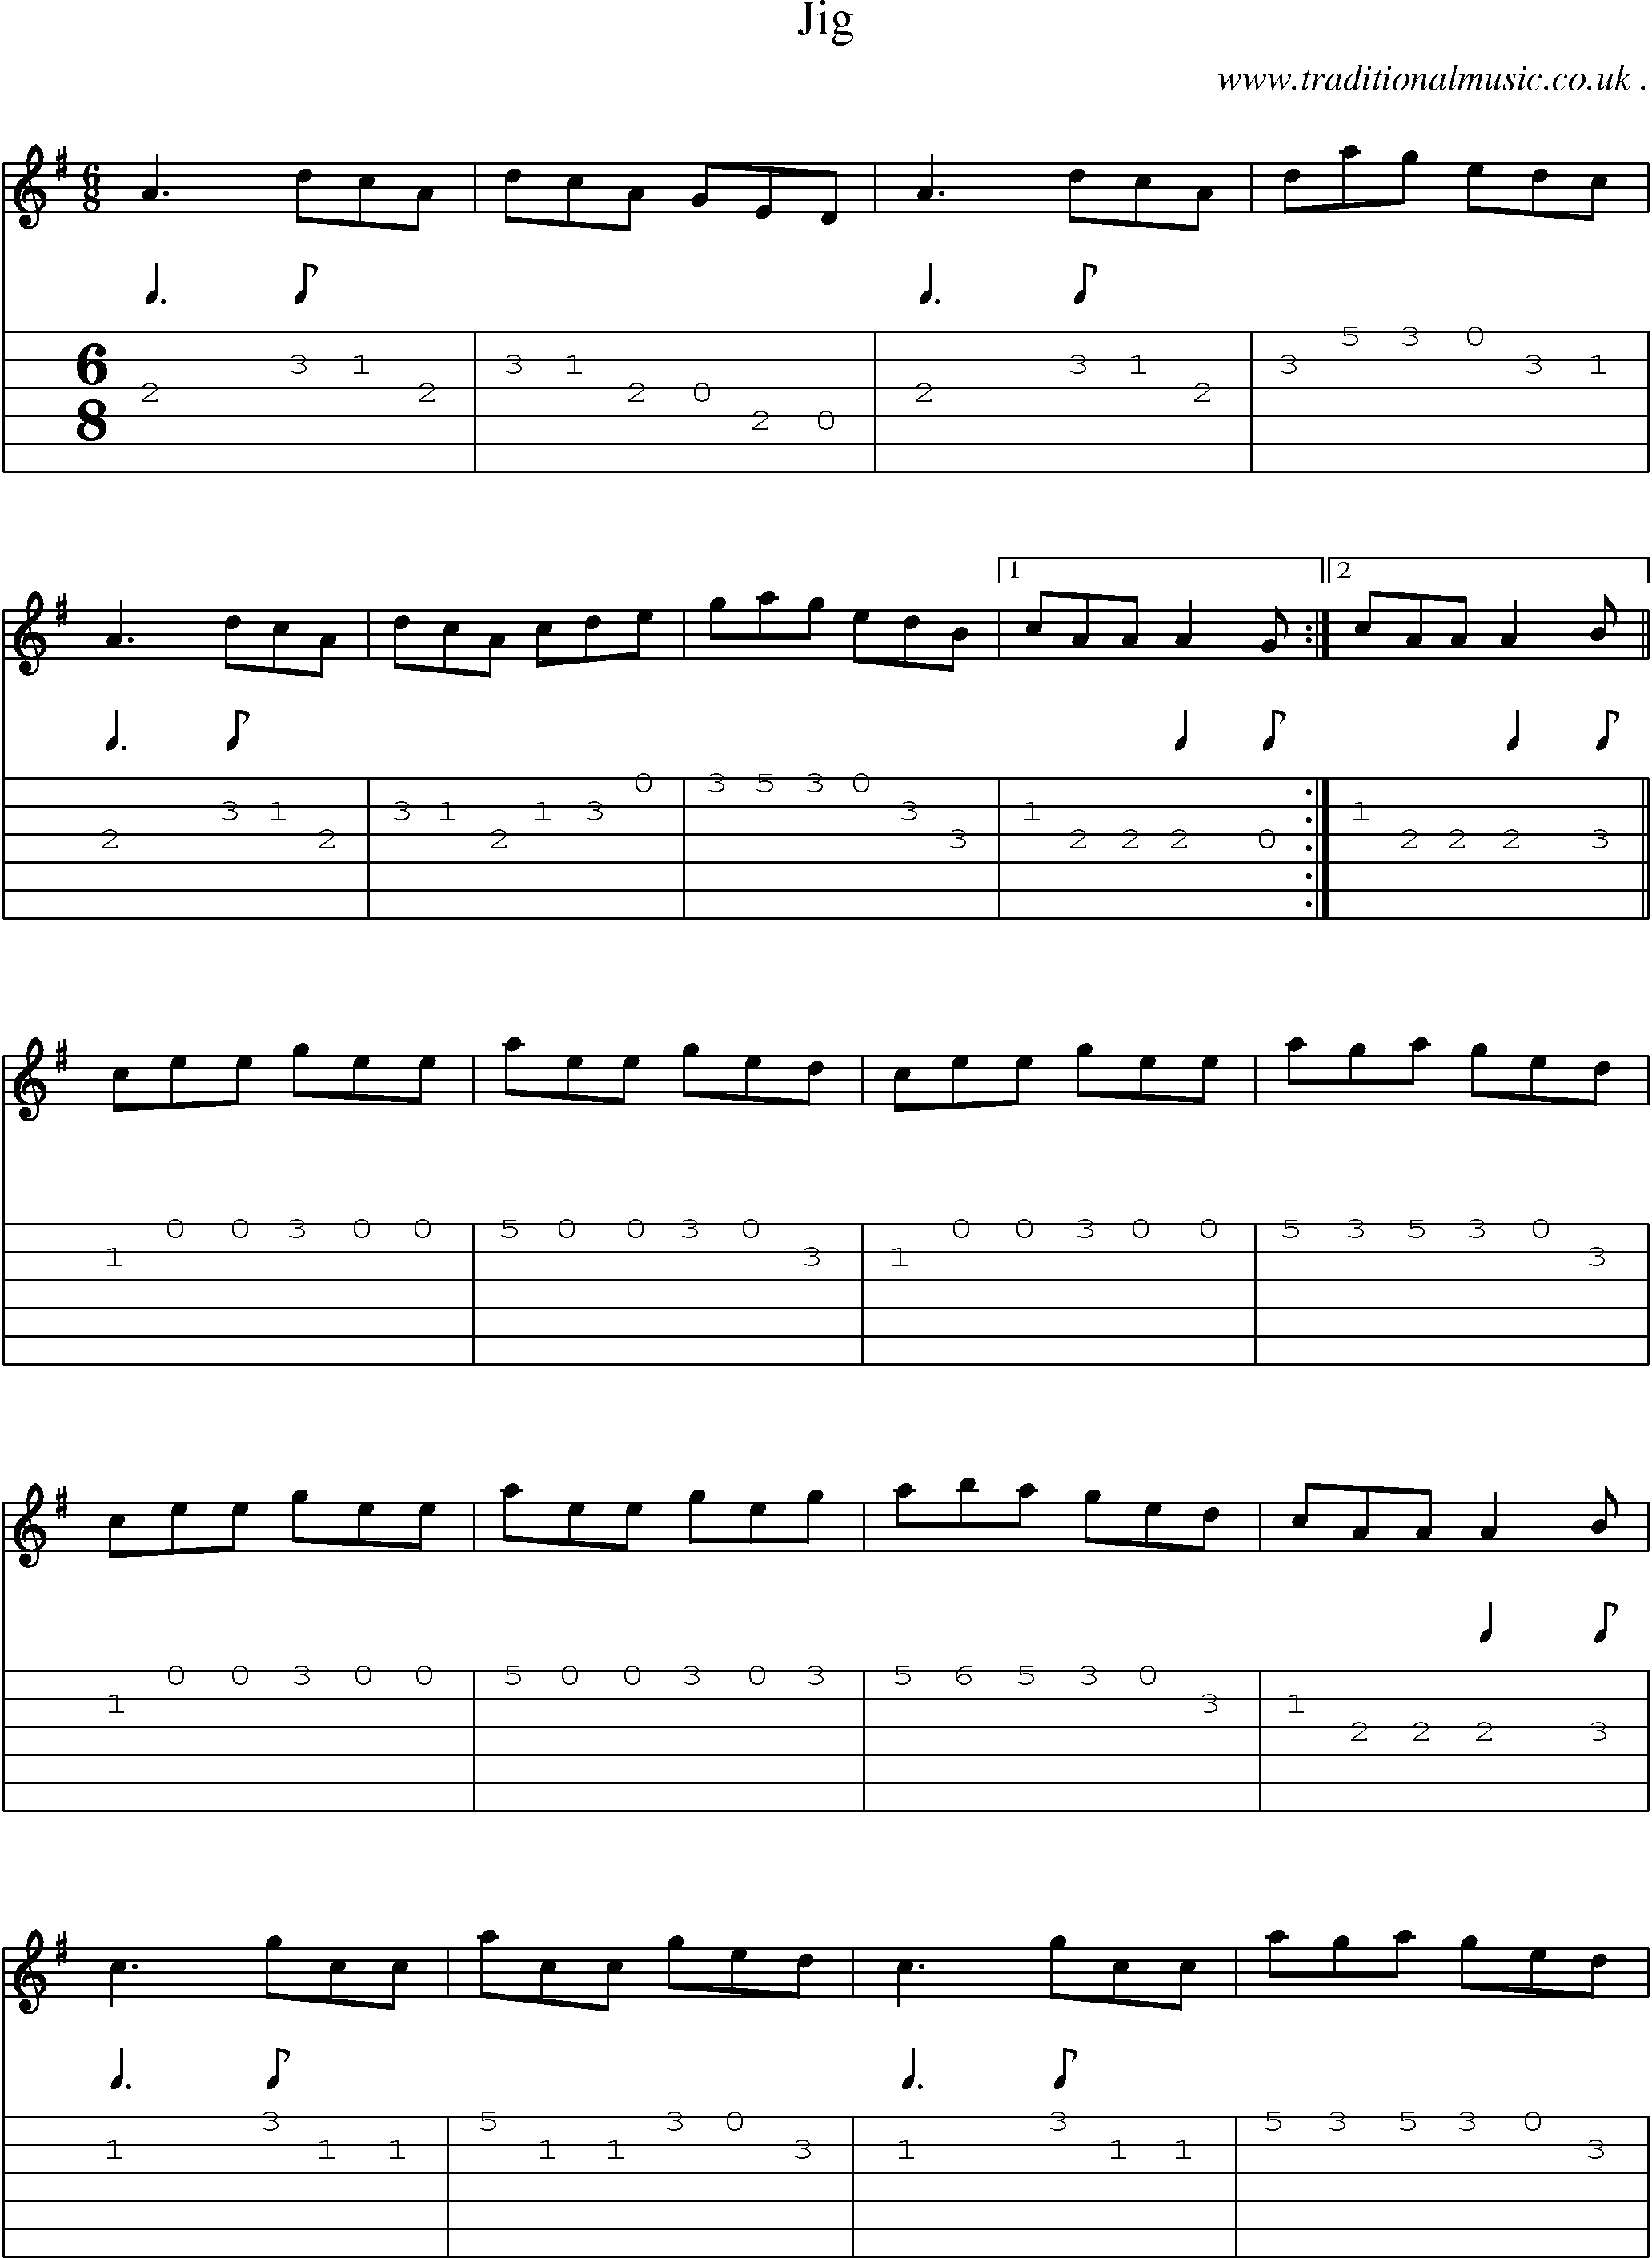 Sheet-Music and Guitar Tabs for Jig